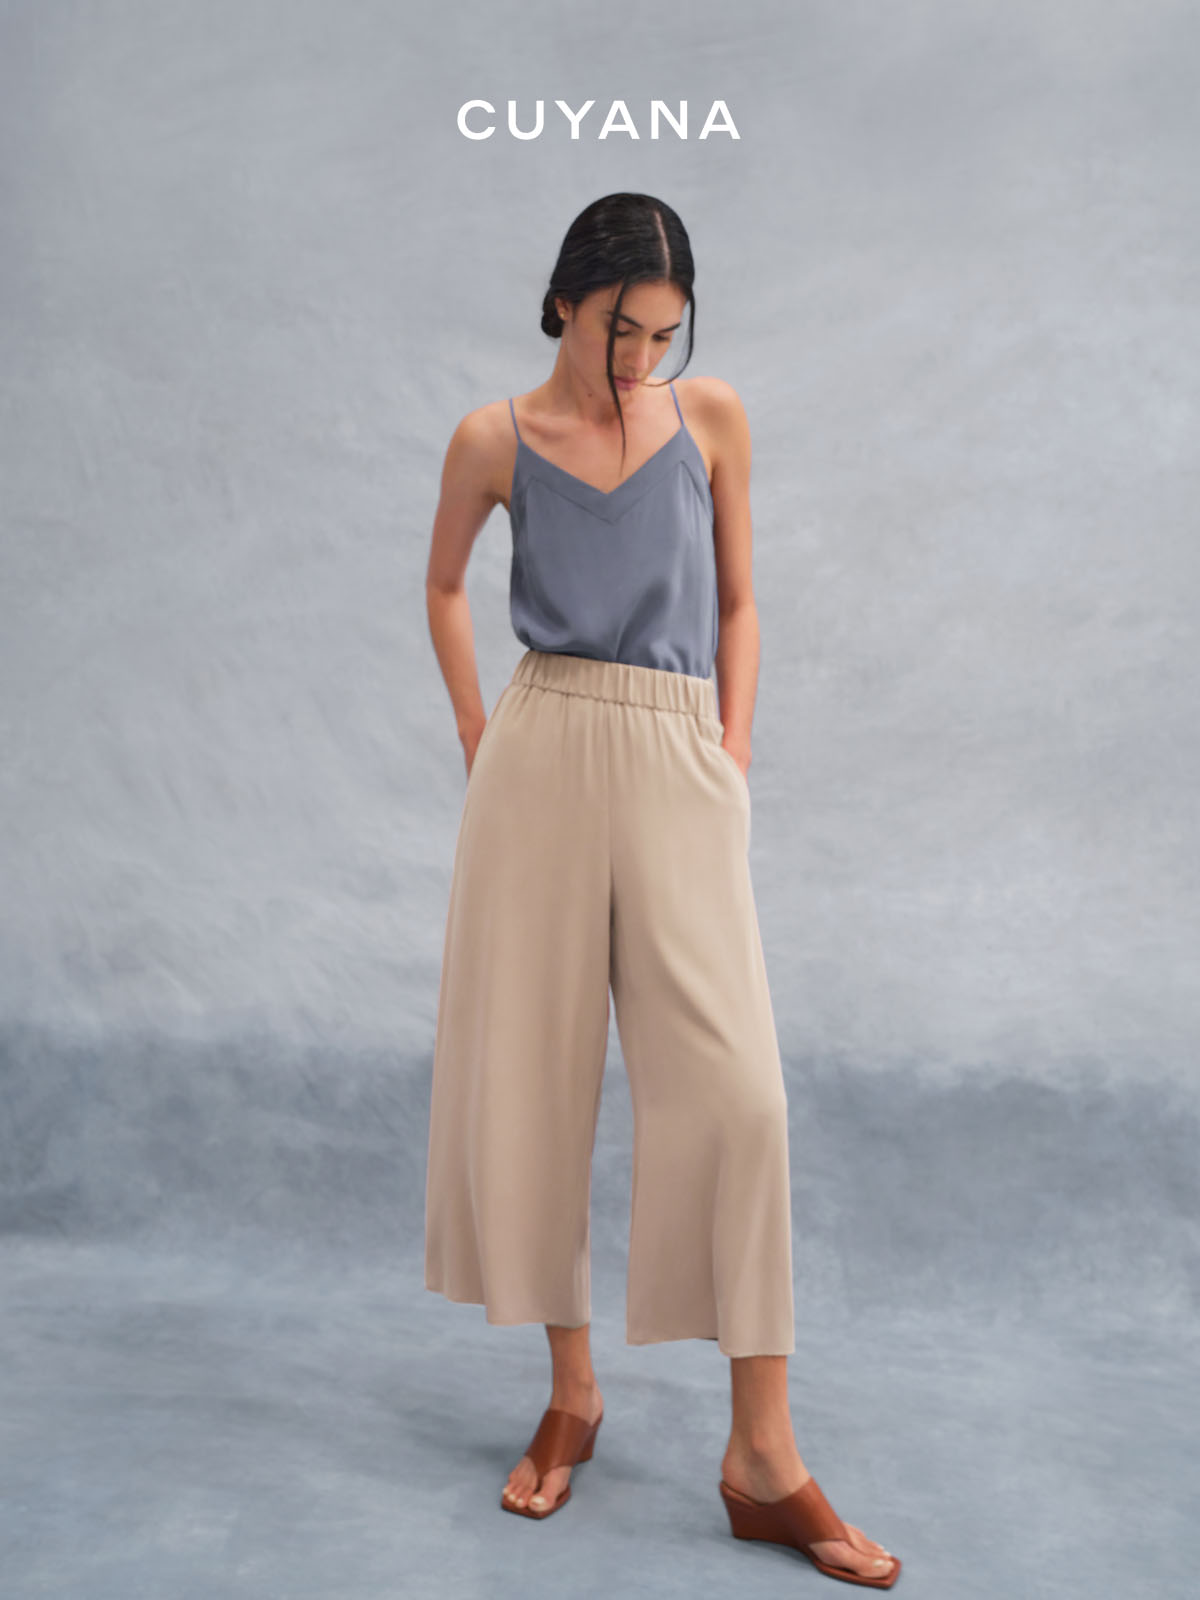 Cuyana: Meet Our New Washable Silk Pant